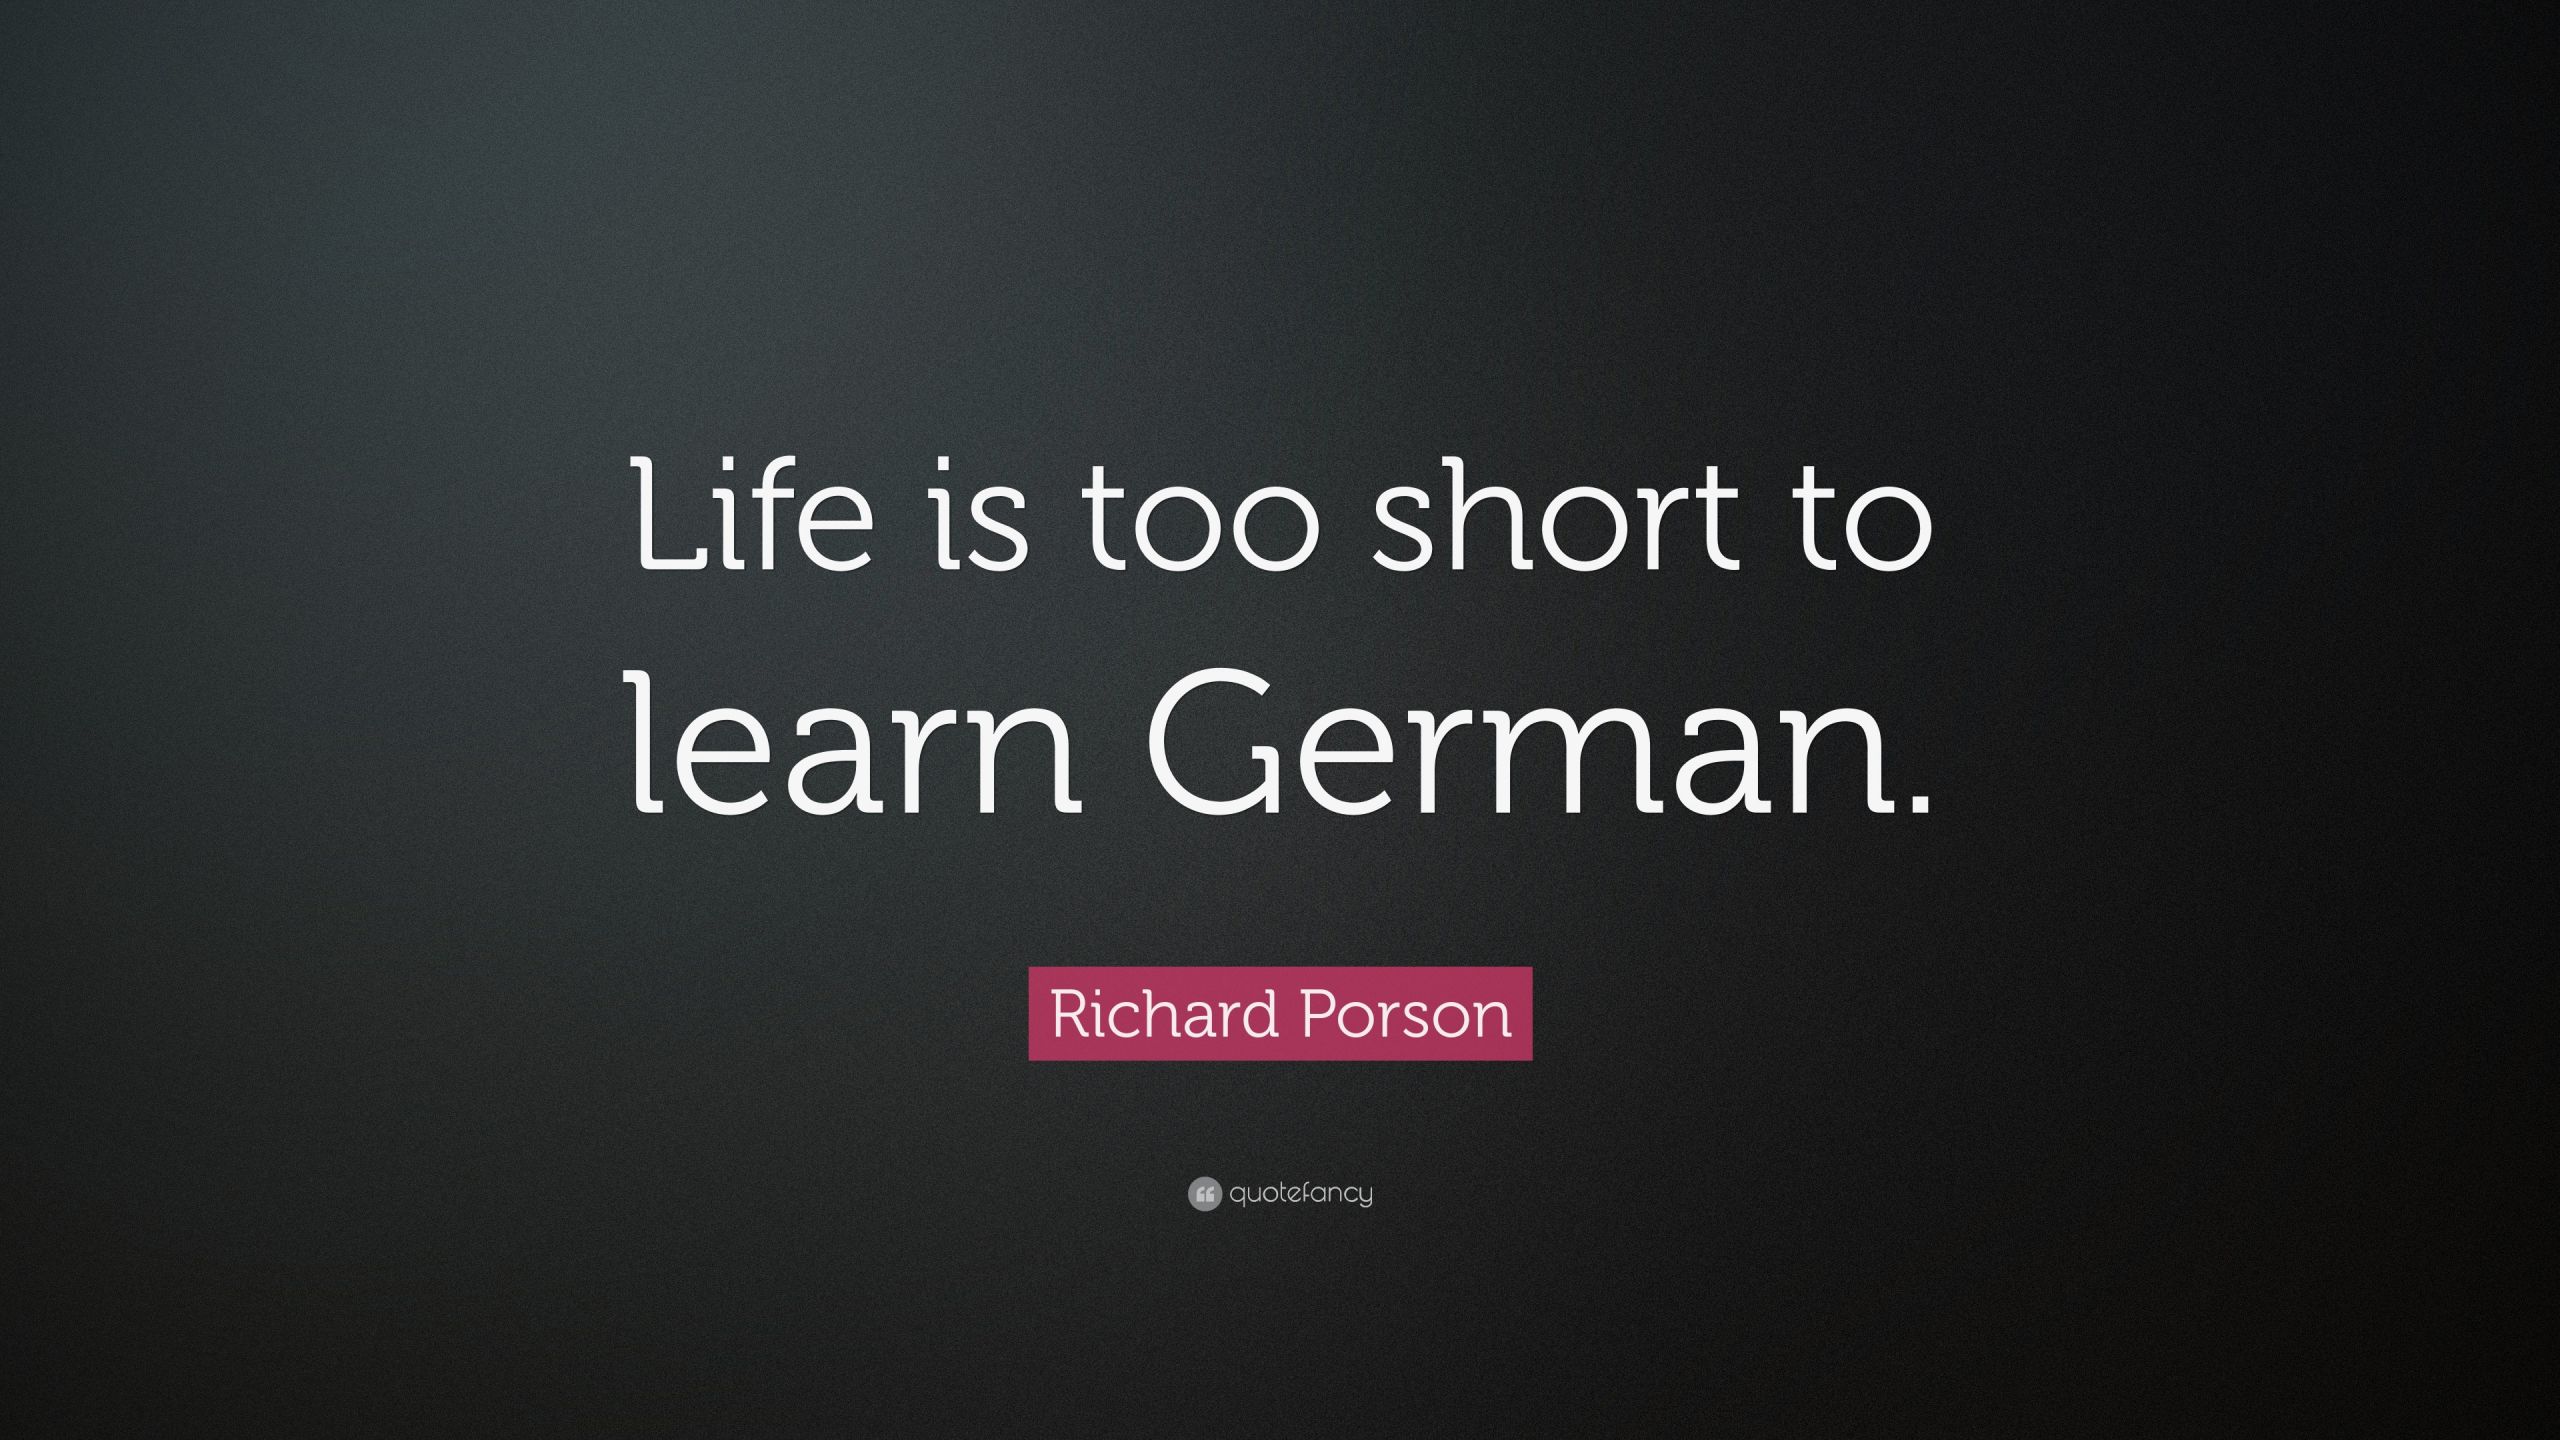 Life'S Too Short Quotes
 Richard Porson Quote “Life is too short to learn German